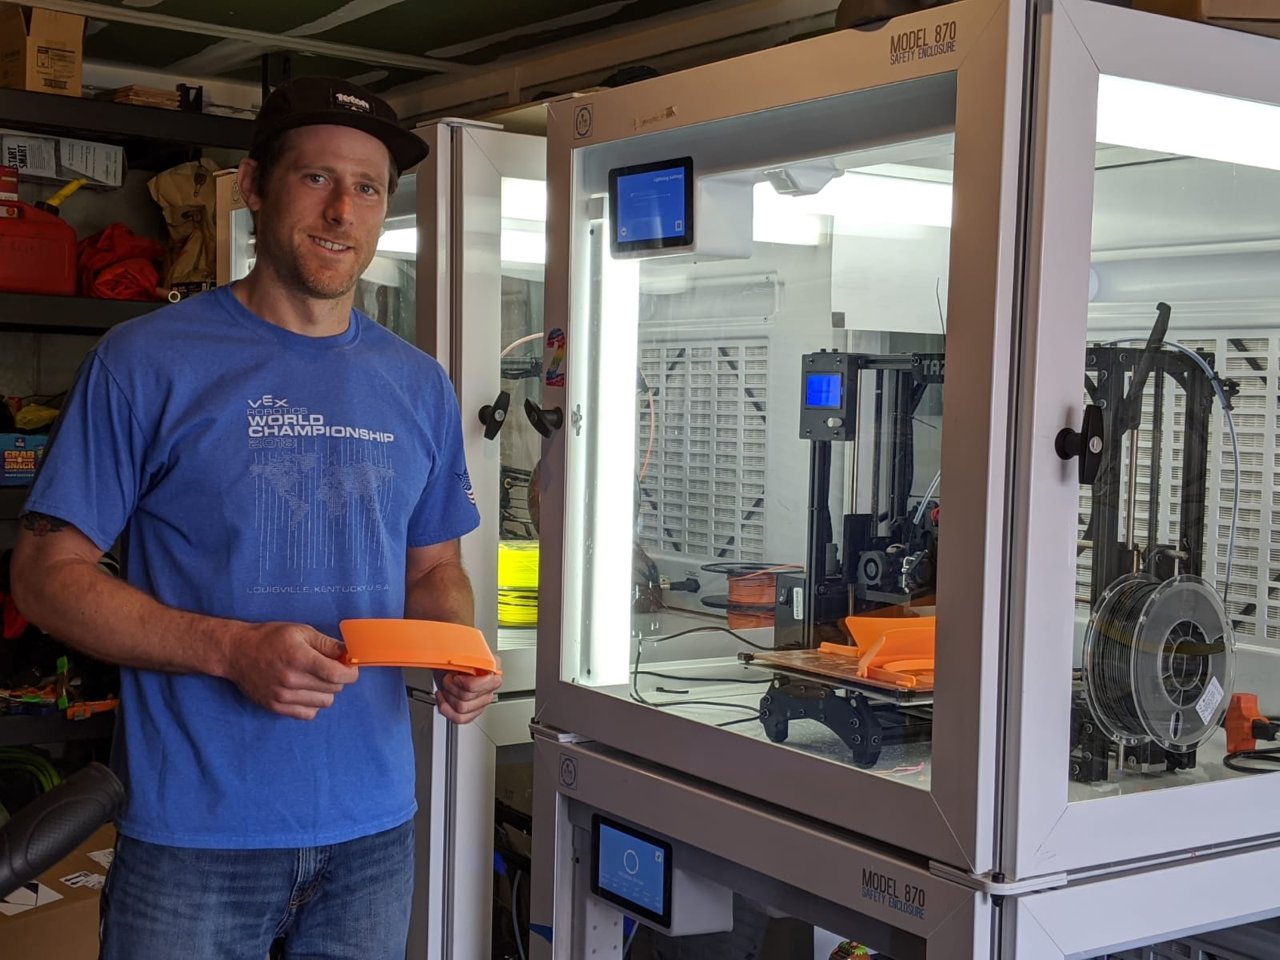 Dan LaManna, a tech ed teacher at South Side Middle School, is using the school’s 3D printers in his home to make face shields for hospital workers